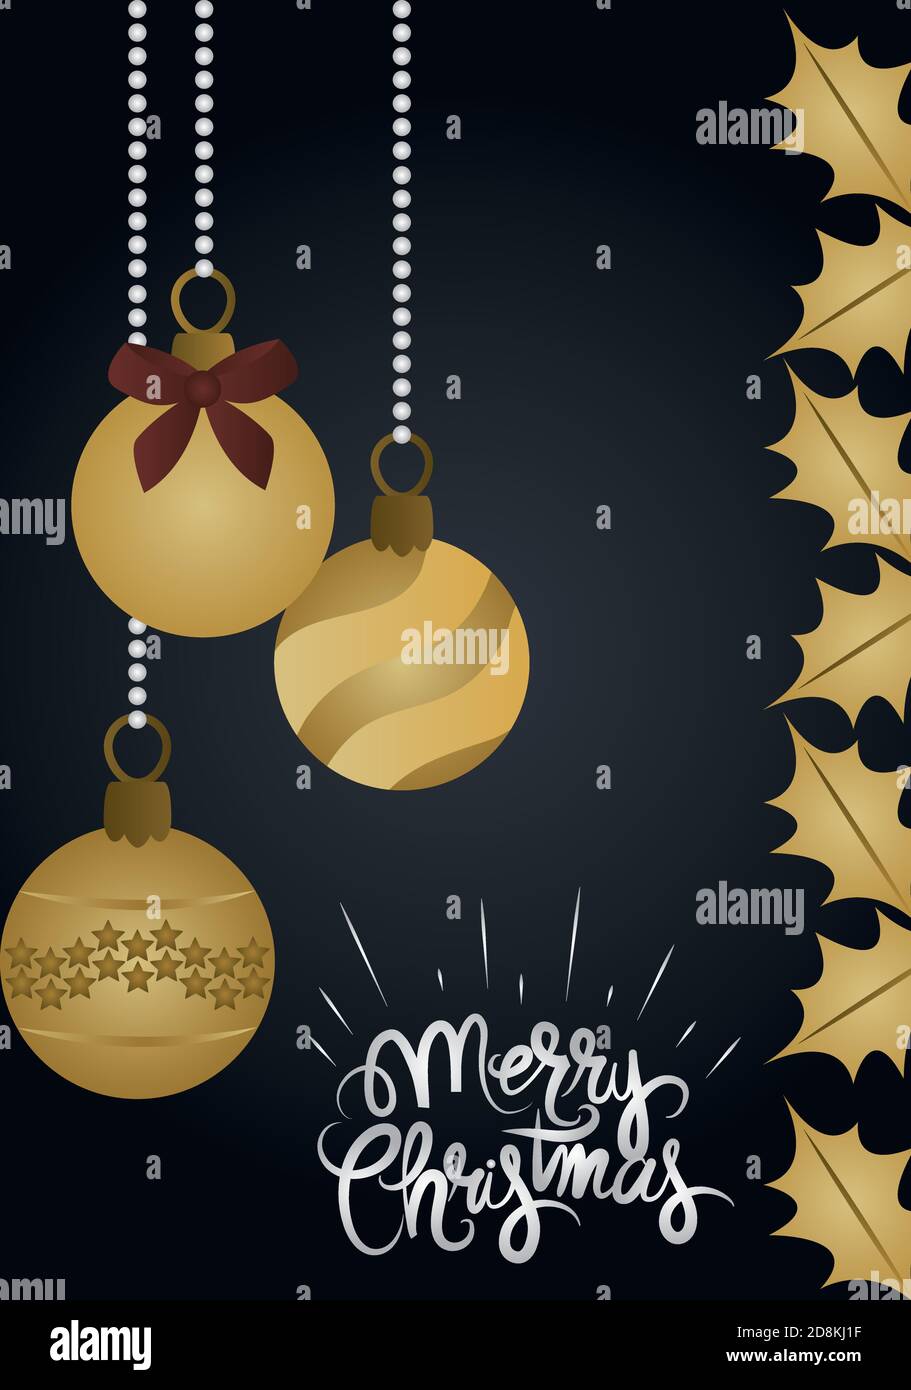 merry christmas, greeting card golden hanging balls and leaves ...